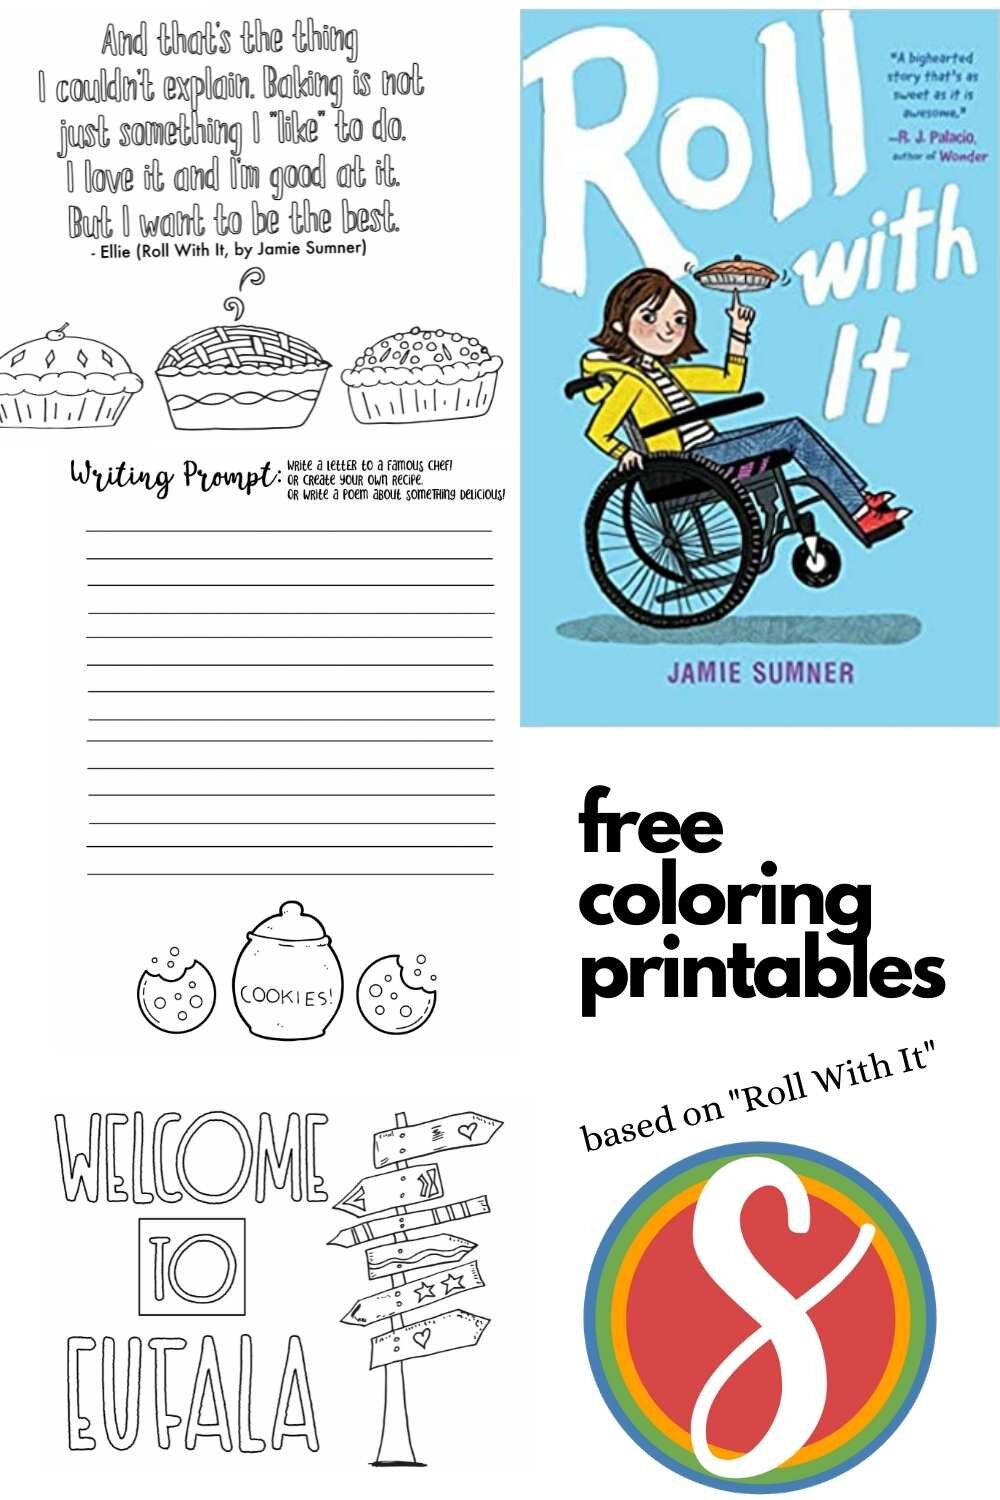 3 free printable pages inspired by Roll With It by Jamie Sumner